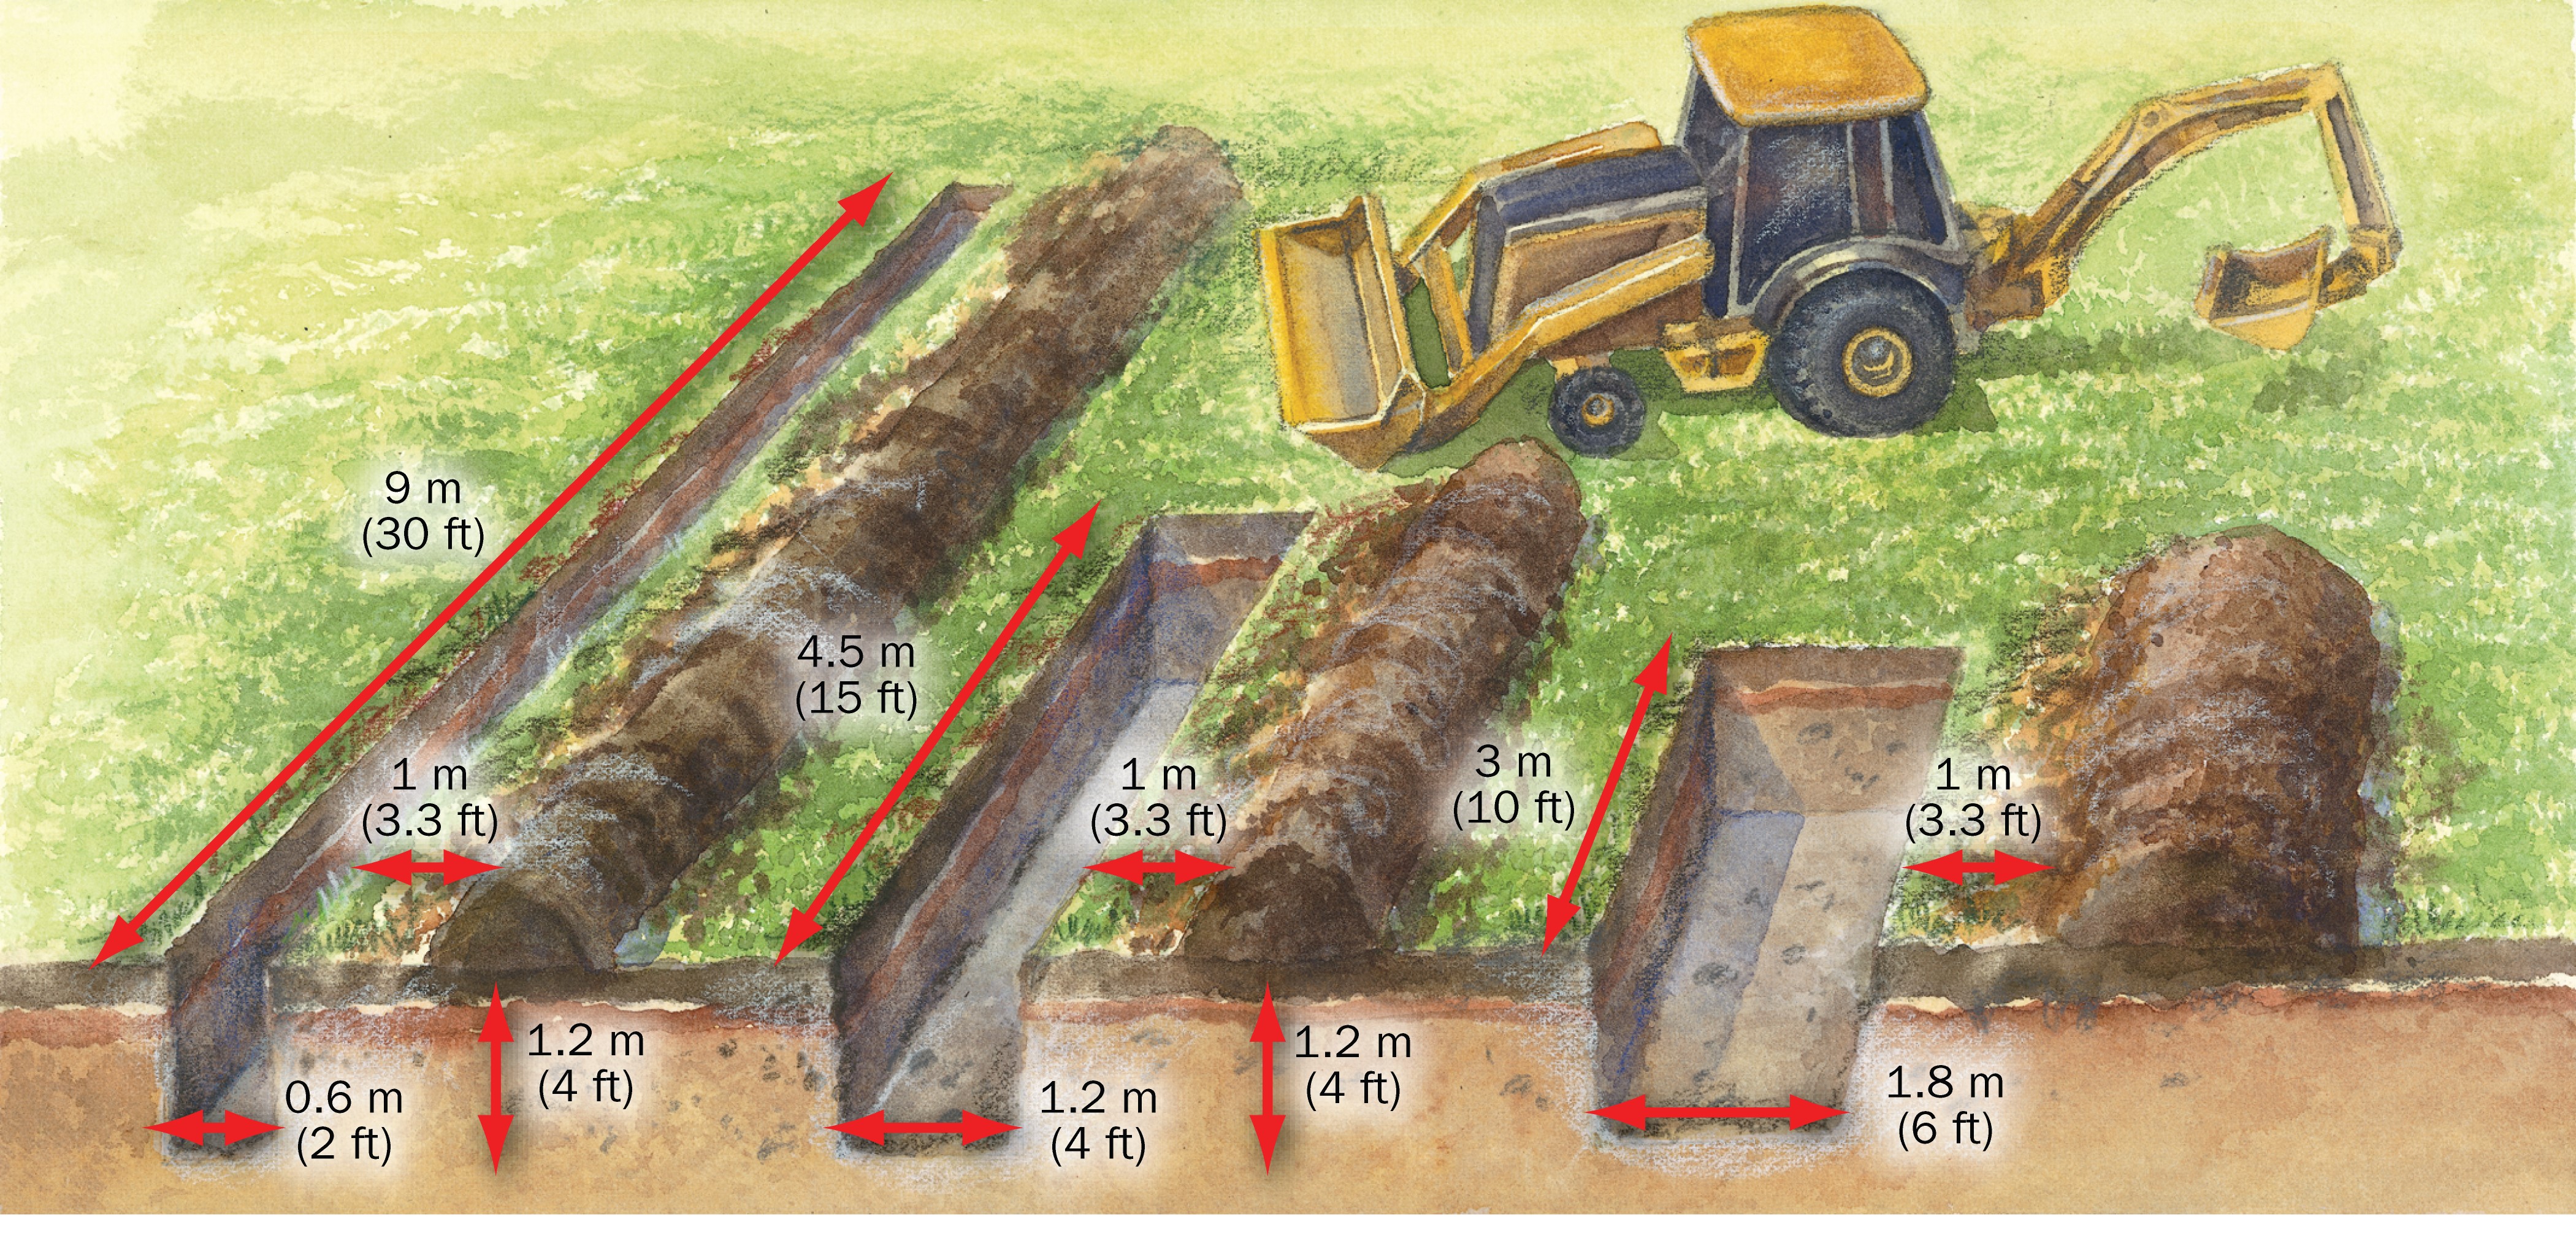 This is an artist’s rendition of three trenches beside each other with a backhoe sitting beside them. The left trench is long and narrow, the centre trench is shorter and wider, while the right trench is short and wide.